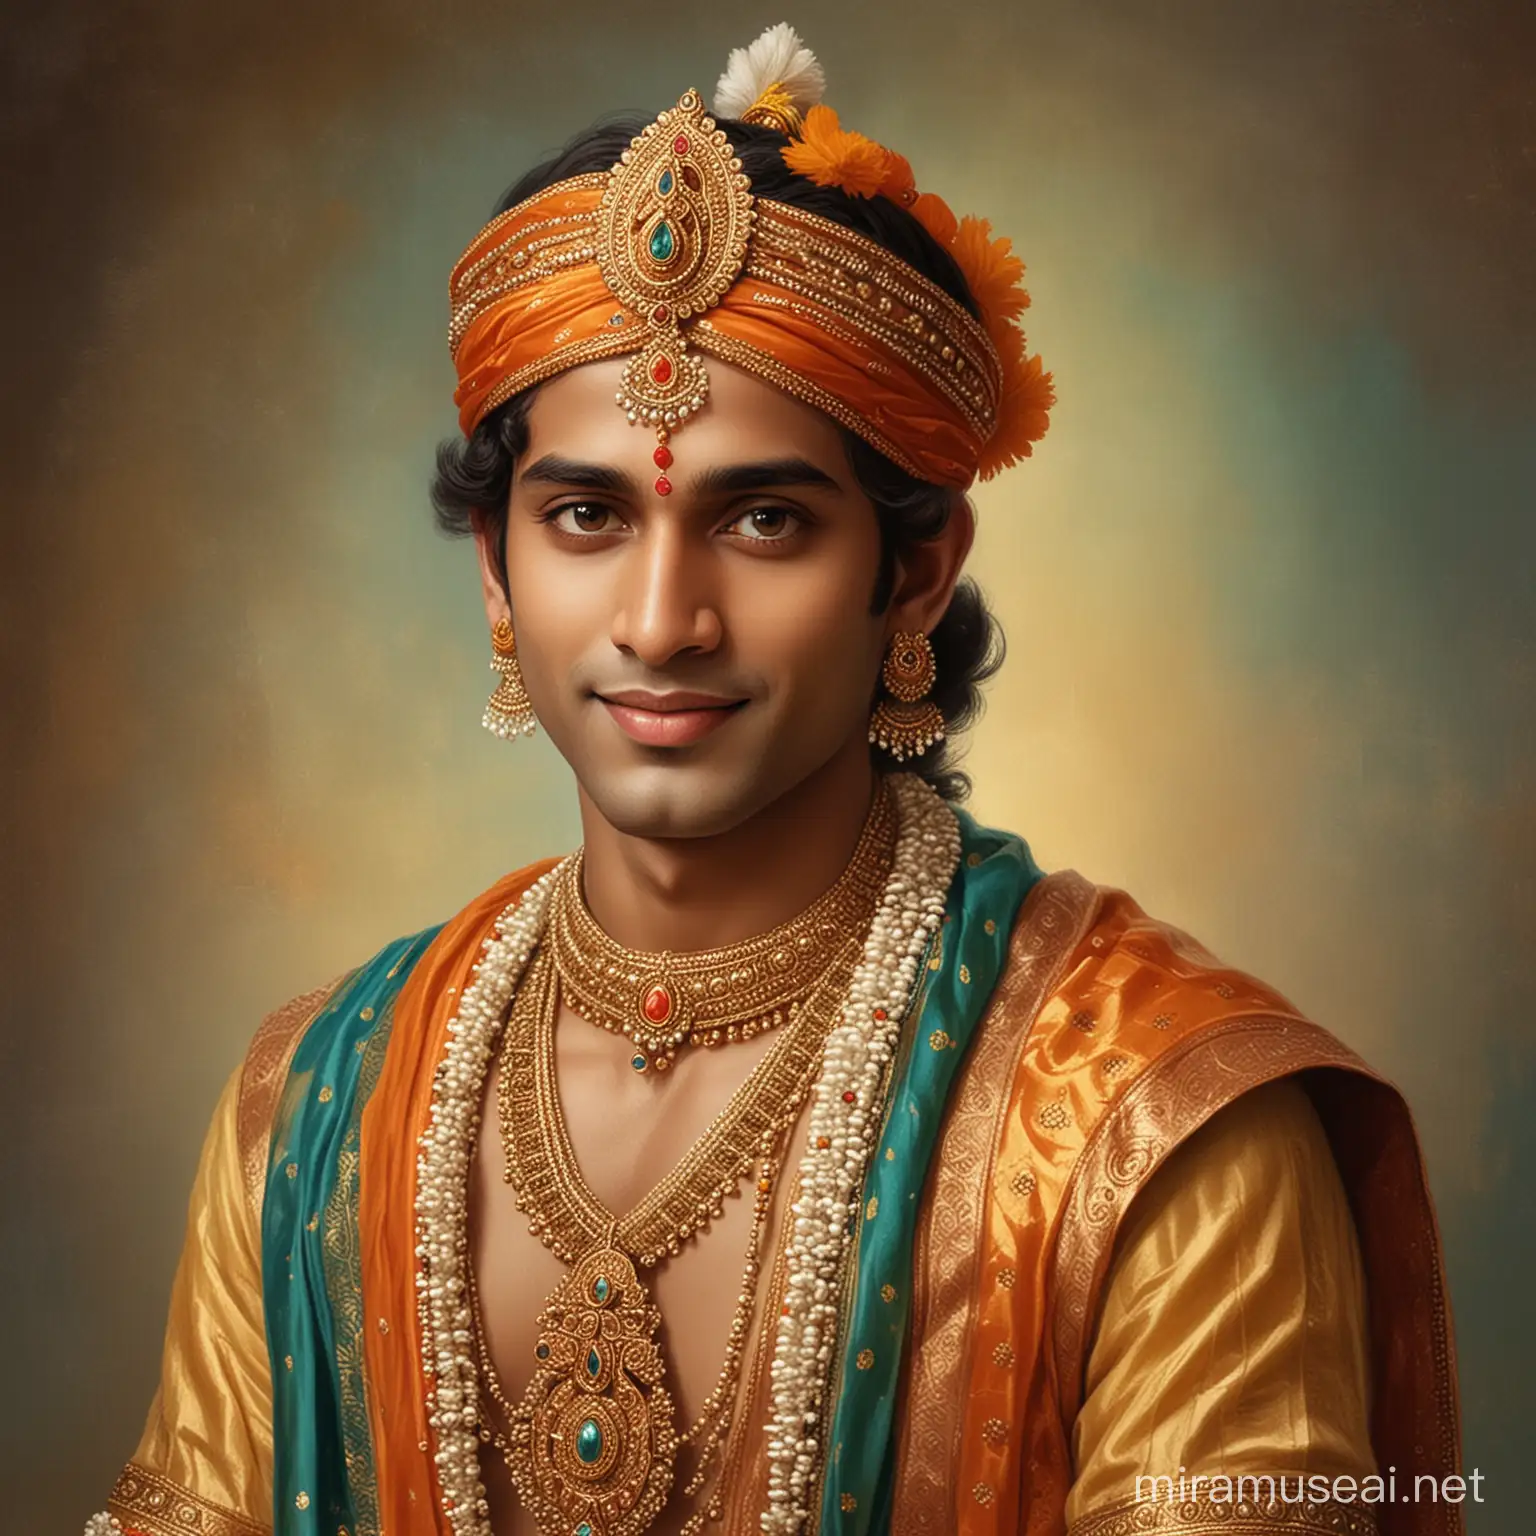 a young adult and most handsome happy prince Lord Sri Rama Chandra in ethnic costume ancient hindus of very pretty colors. 